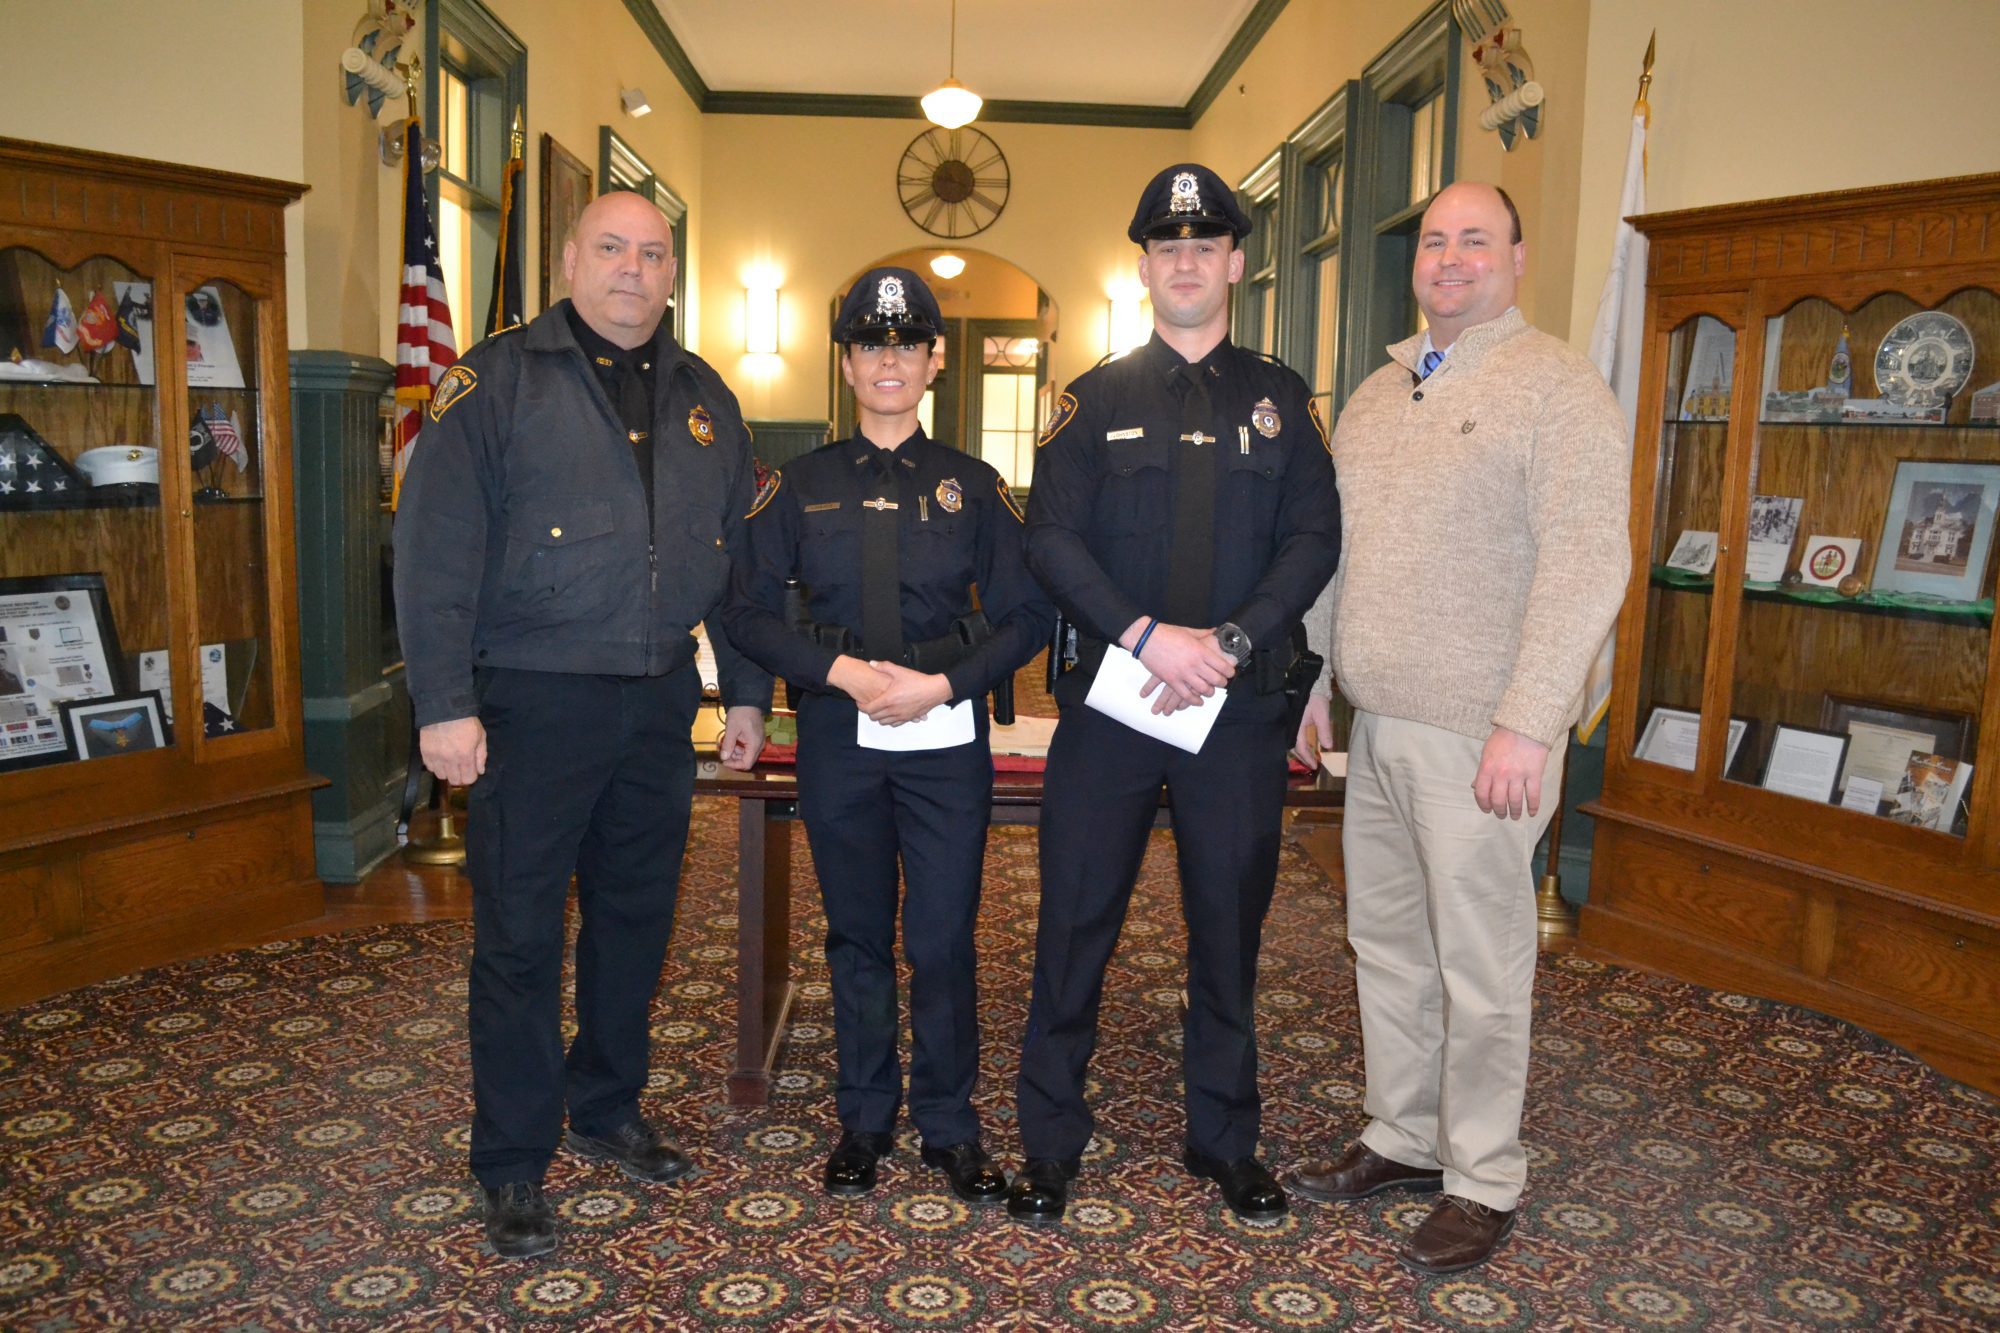 From left: Interim Police Chief Ronald Giorgetti, Officer Jenna Loverme, Officer Vince Johnston, and Town Manager Scott Crabtree.